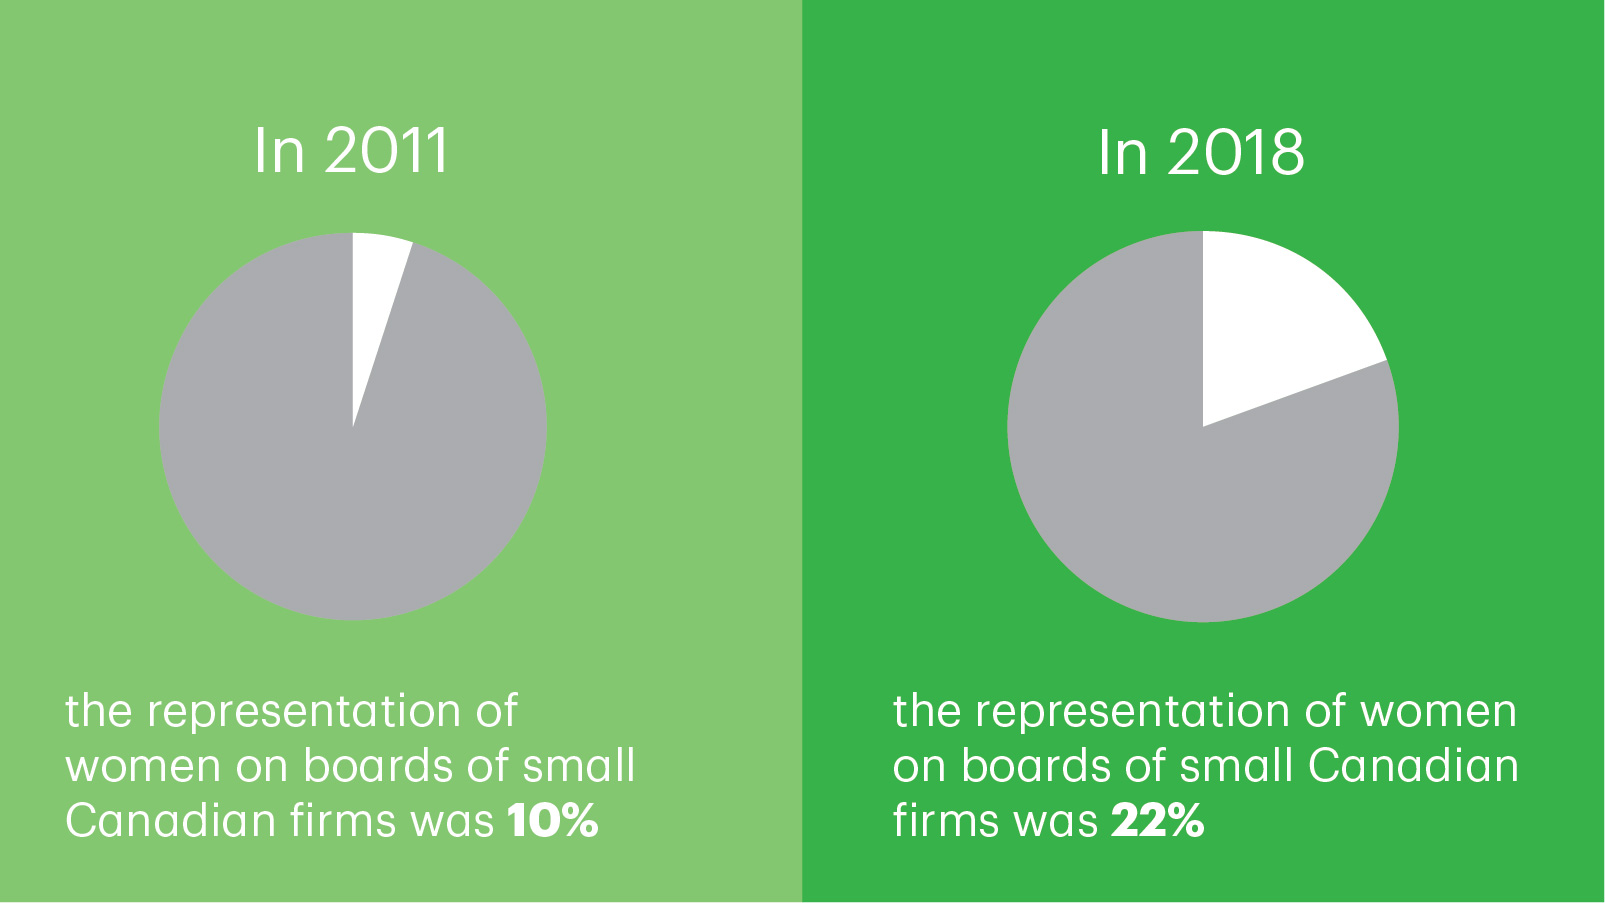 Image of two pie charts. In 2011 the representation of women on boards of small Canadian firms was 10%. In 2018 the representation of women on boards of small Canadian firms was 22%.